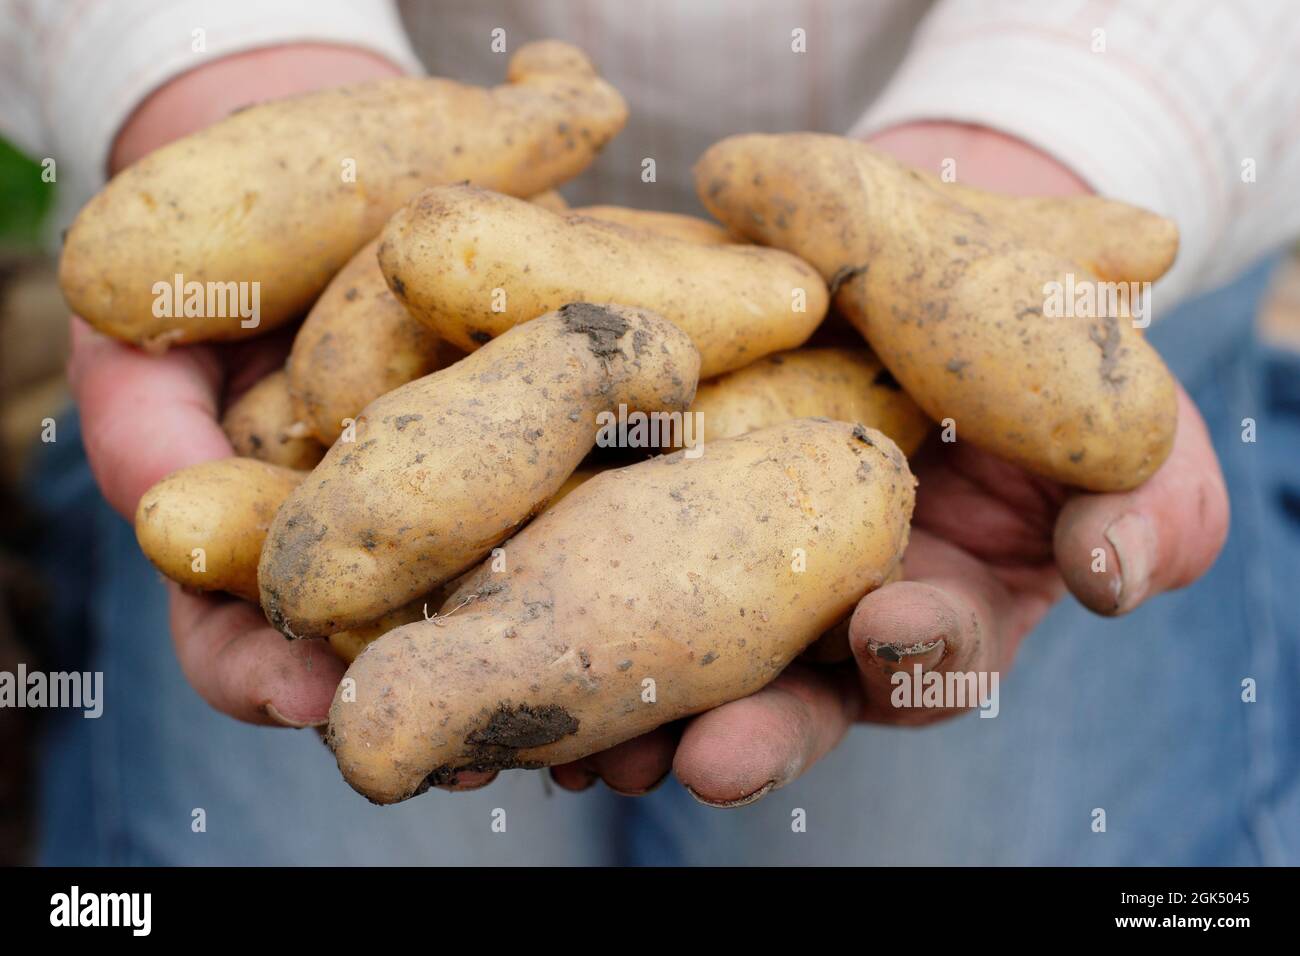 Muddy potatoes in hands. Freshly lifted 'Ratte' maincrop potatoes held by the grower in his garden in early September. UK Stock Photo